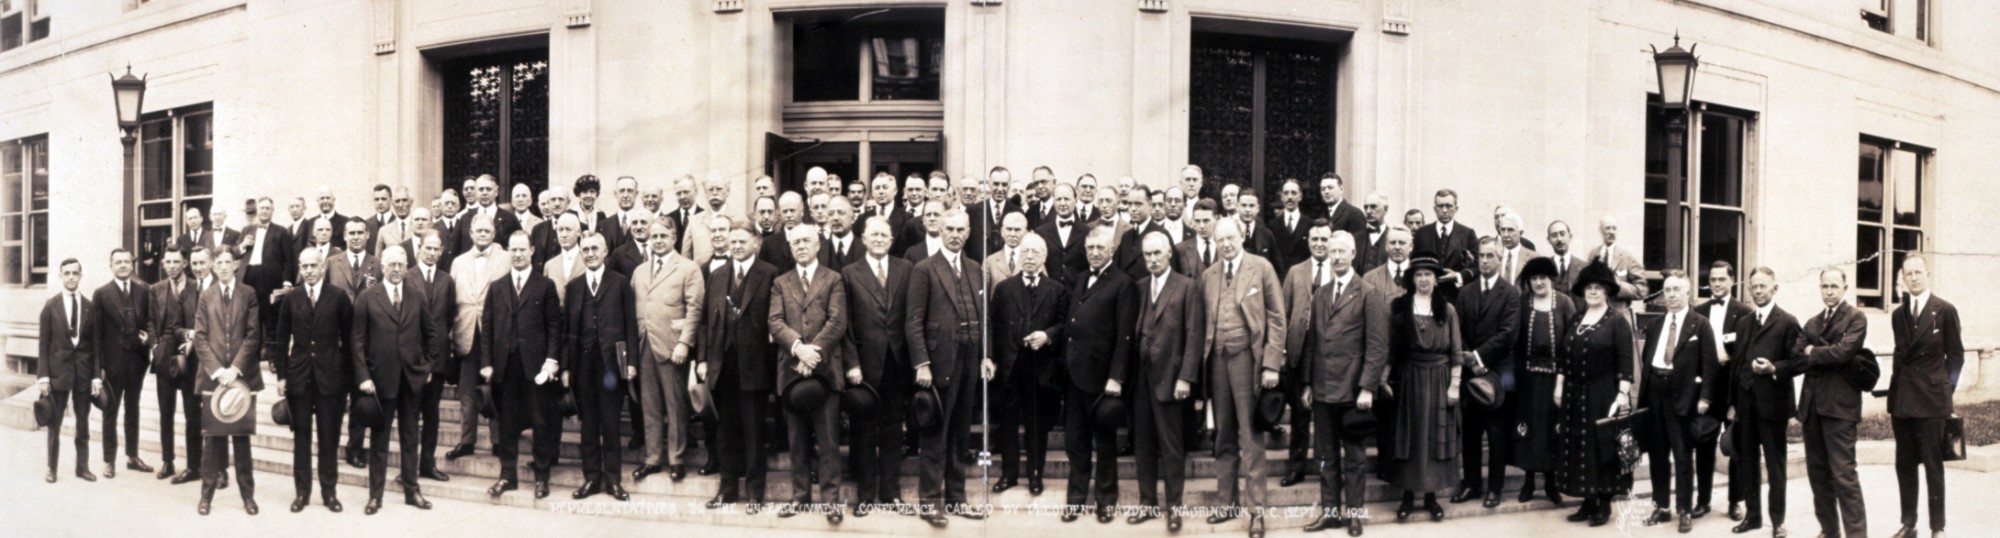 1921 recession, President's Conference on Unemployment